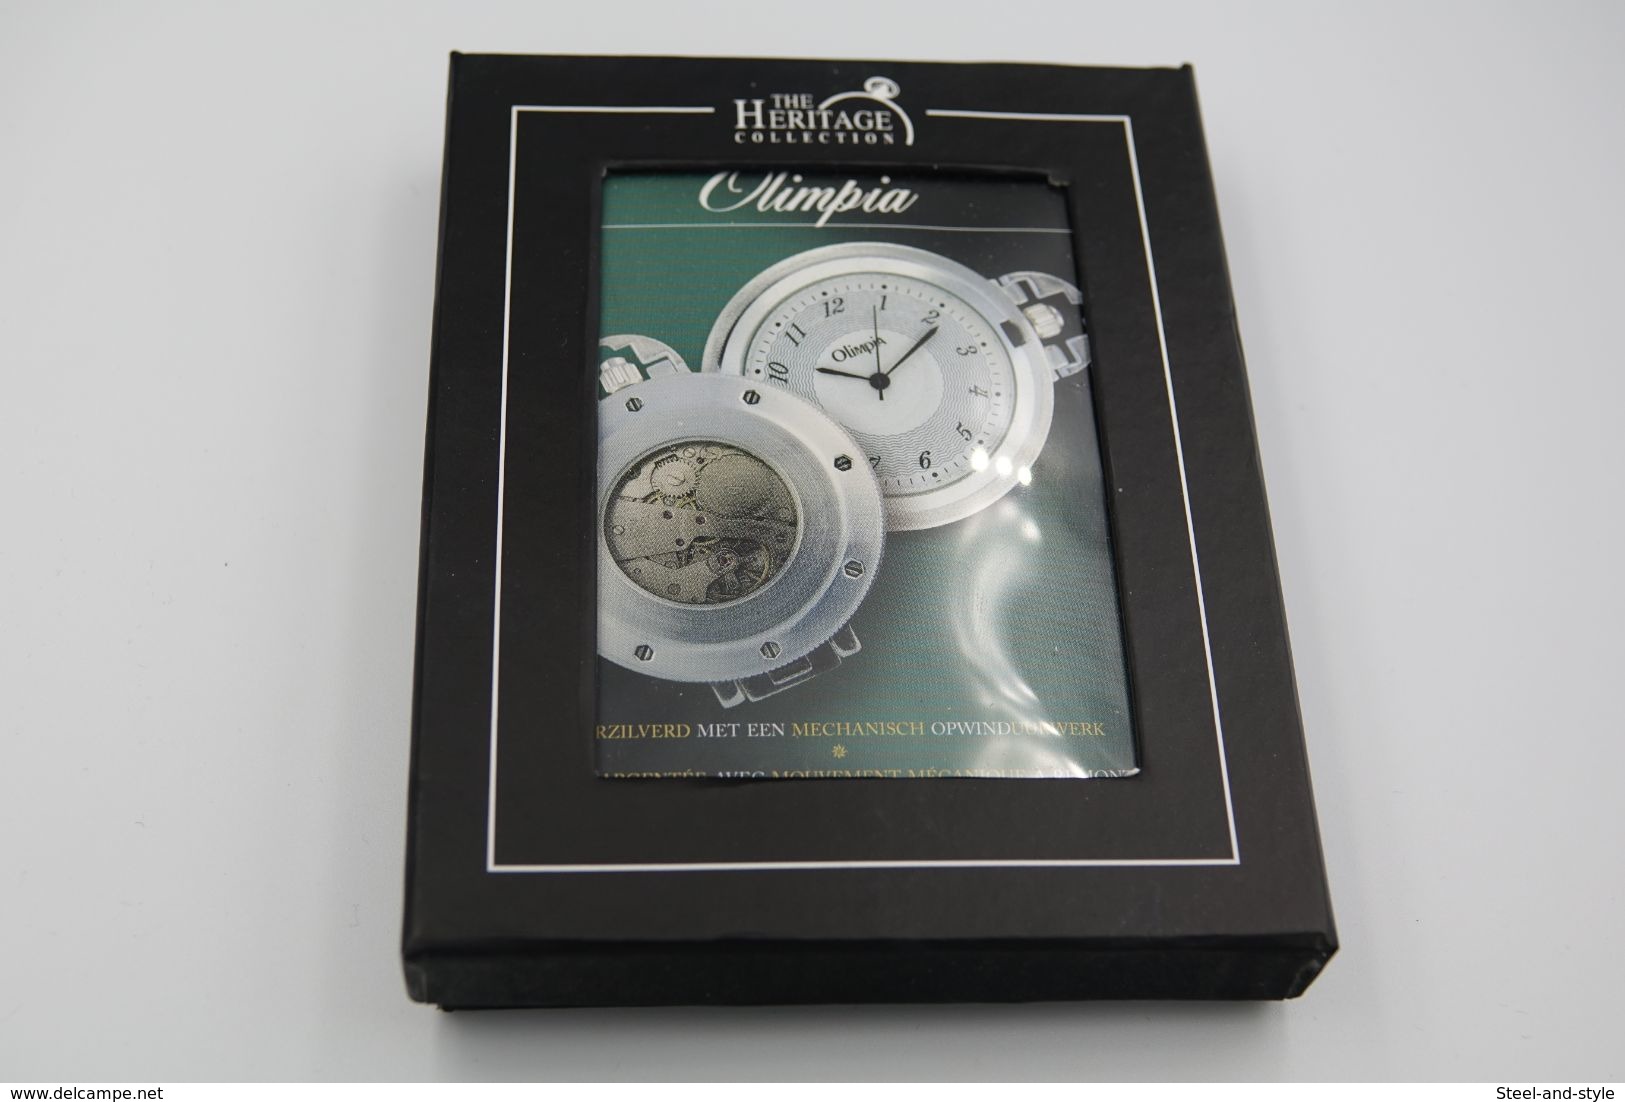 Relojes de bolsillo - watches : HERITAGE COLLECTION HAND WIND: Olimpia -  original with original box and certificat - running